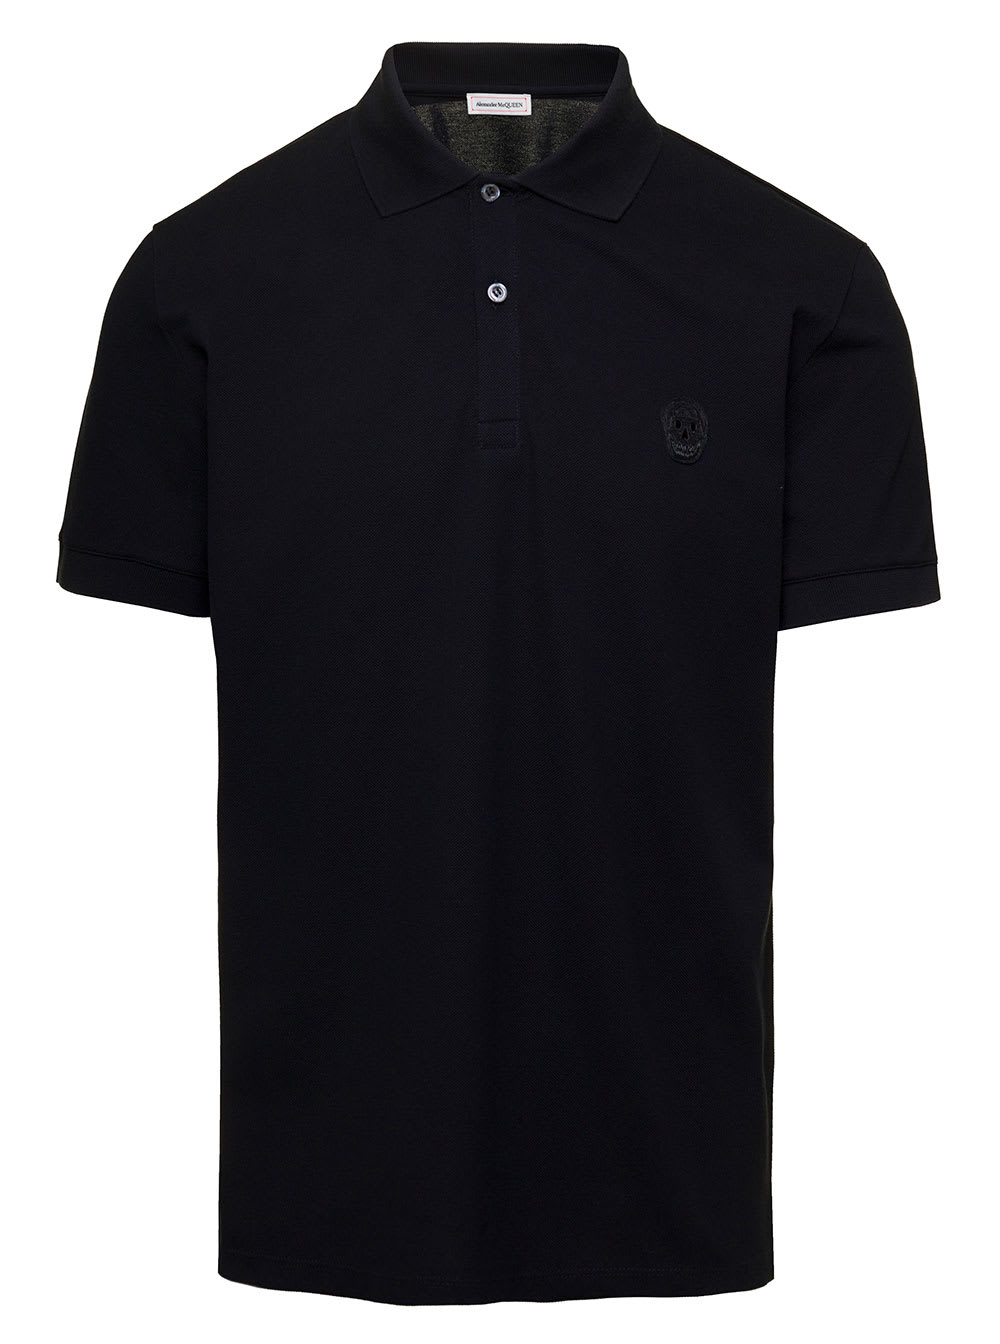 Skull Patch Polo T-shirt